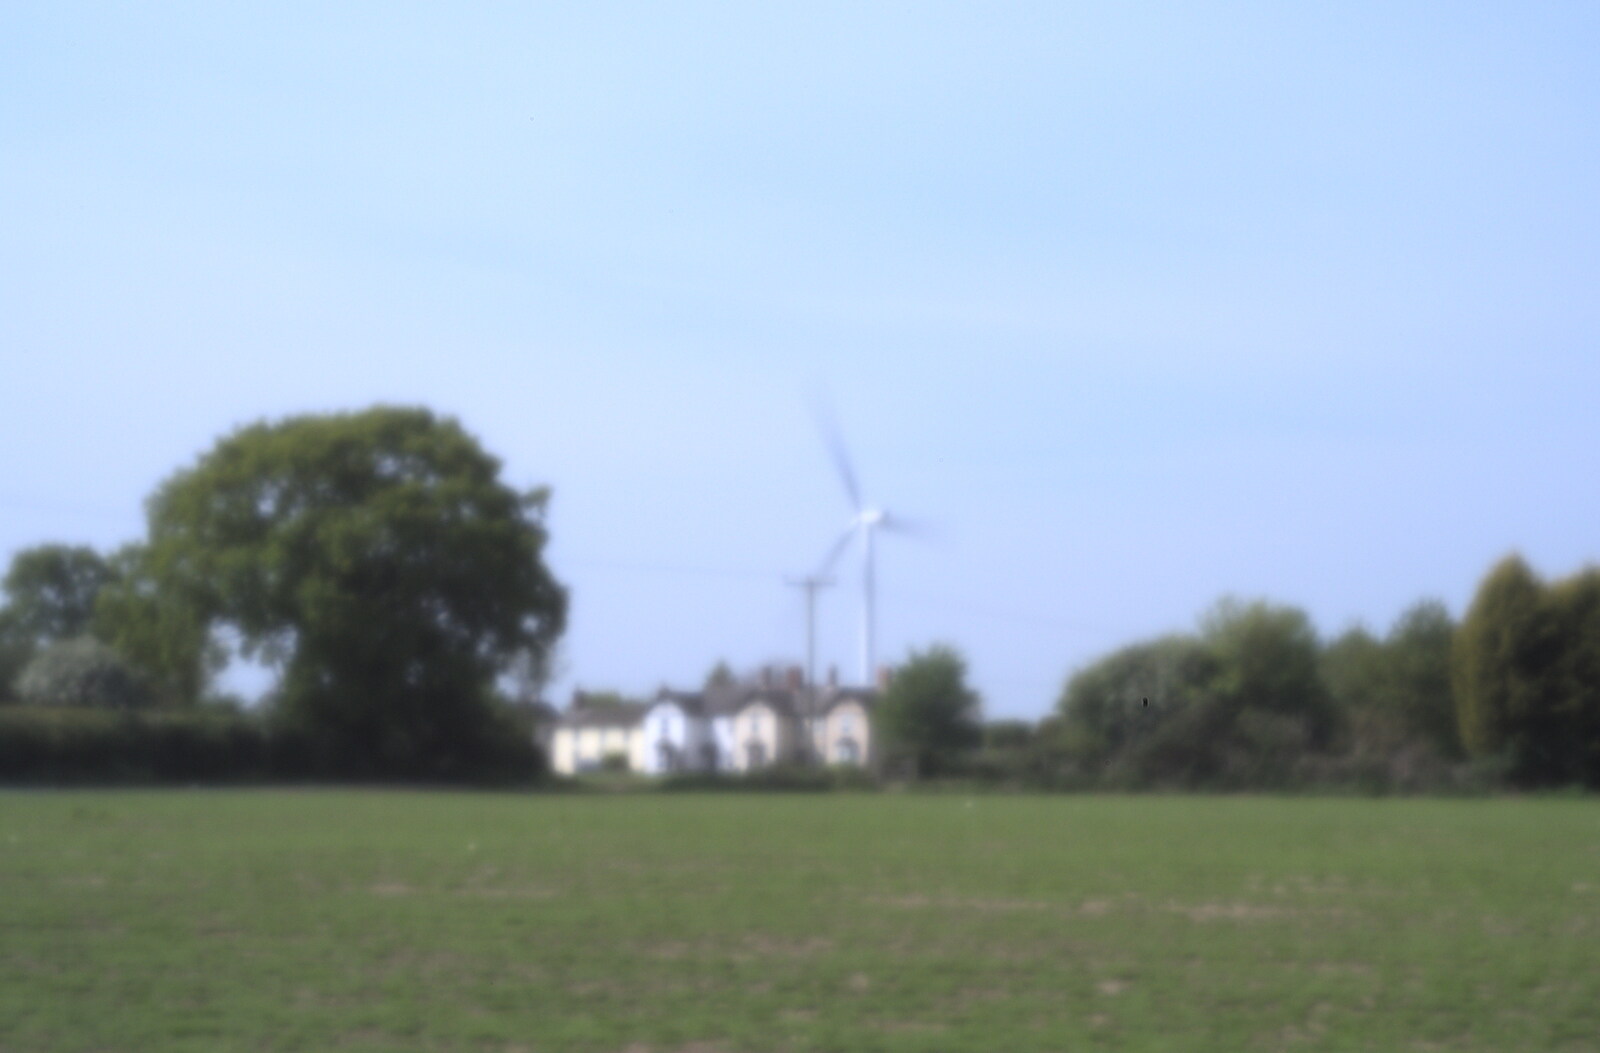 The turbines over the side field from Pin-hole Cameras and a Red Arrows Flypast, Brome, Suffolk - 8th May 2020